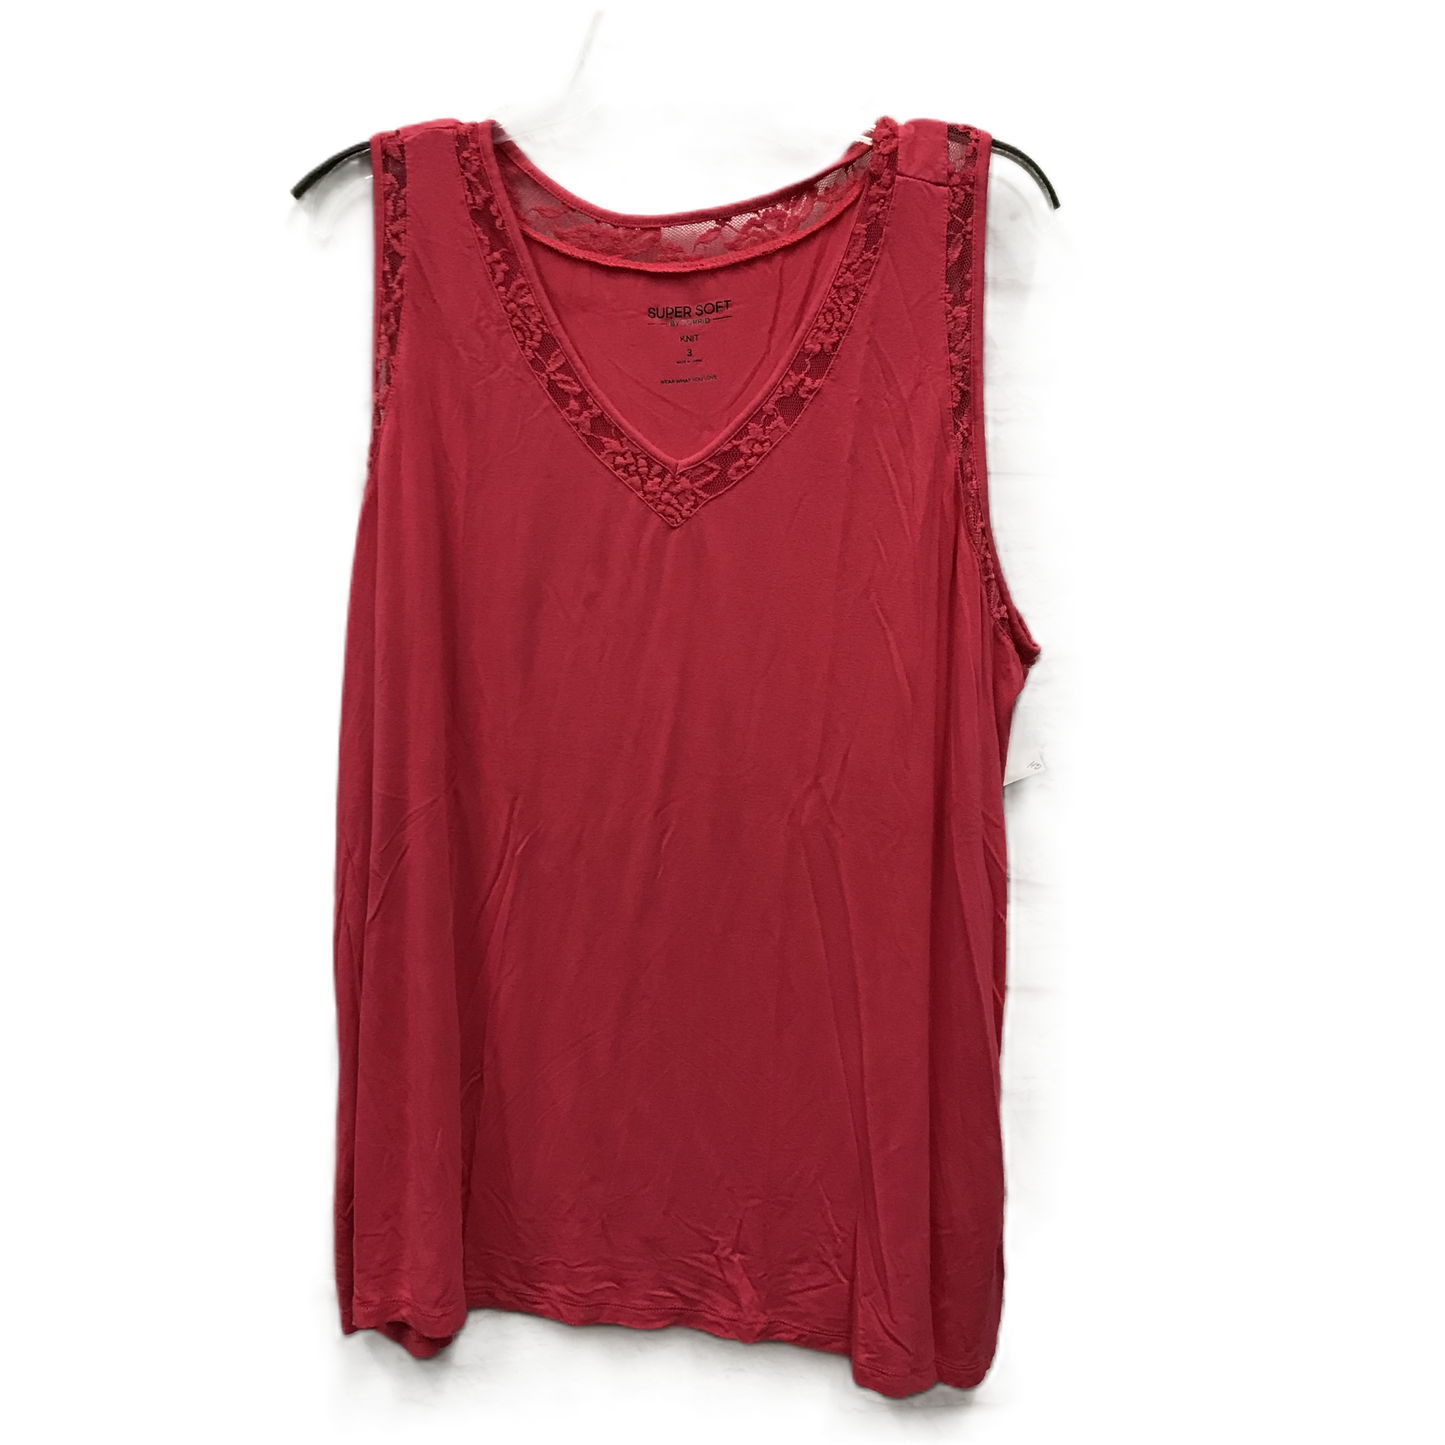 Pink Top Sleeveless By Torrid, Size: 3x